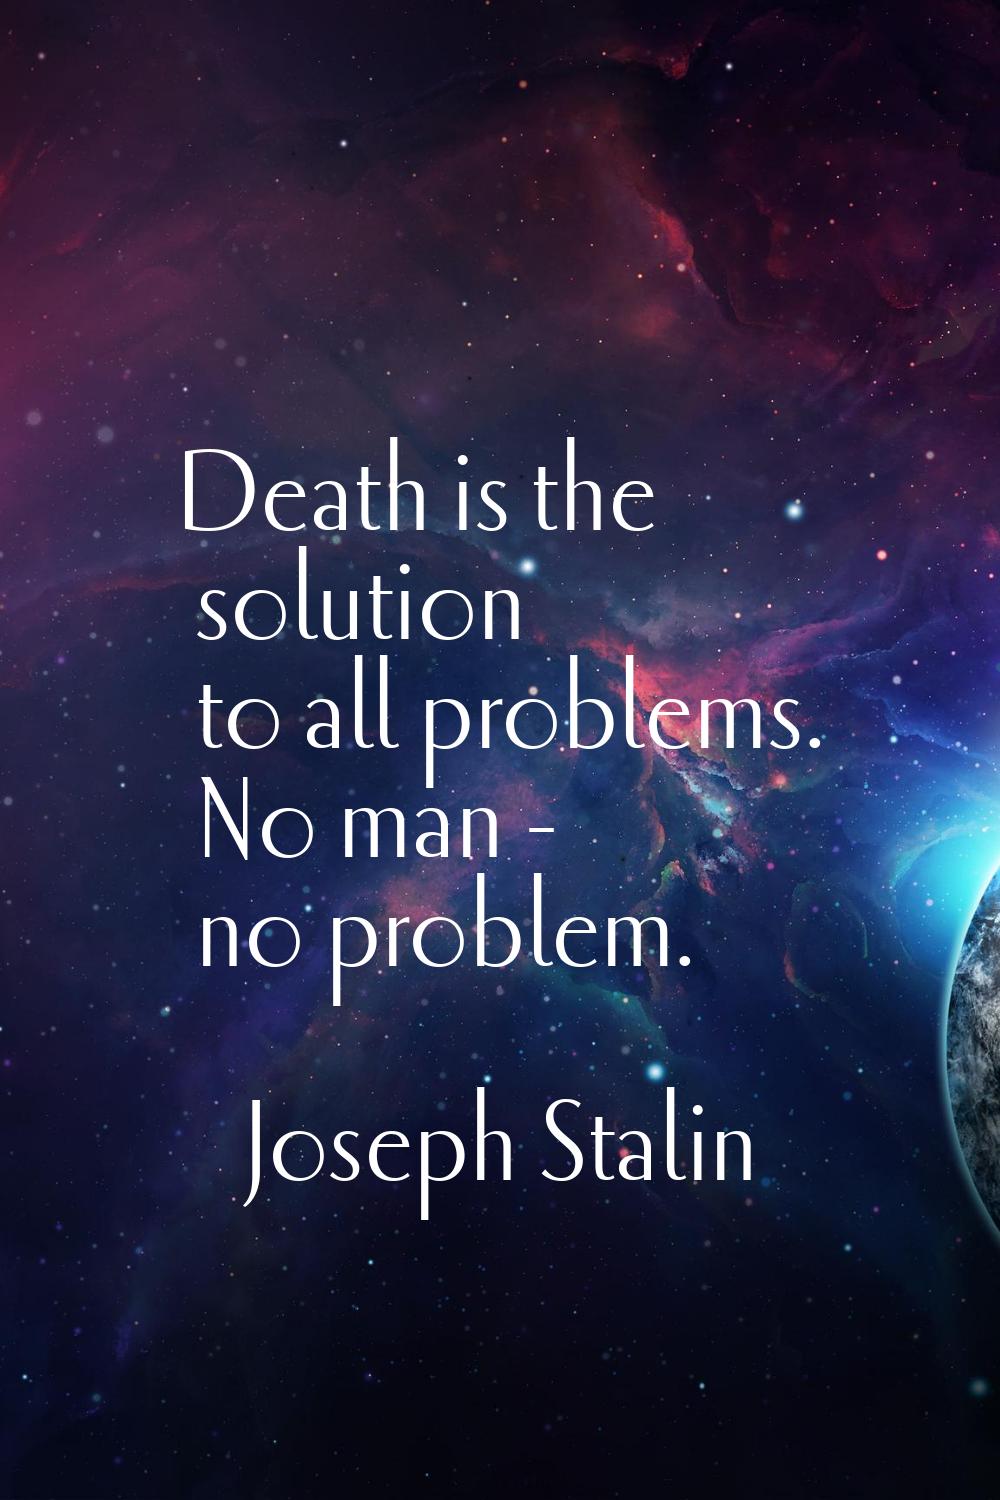 Death is the solution to all problems. No man - no problem.